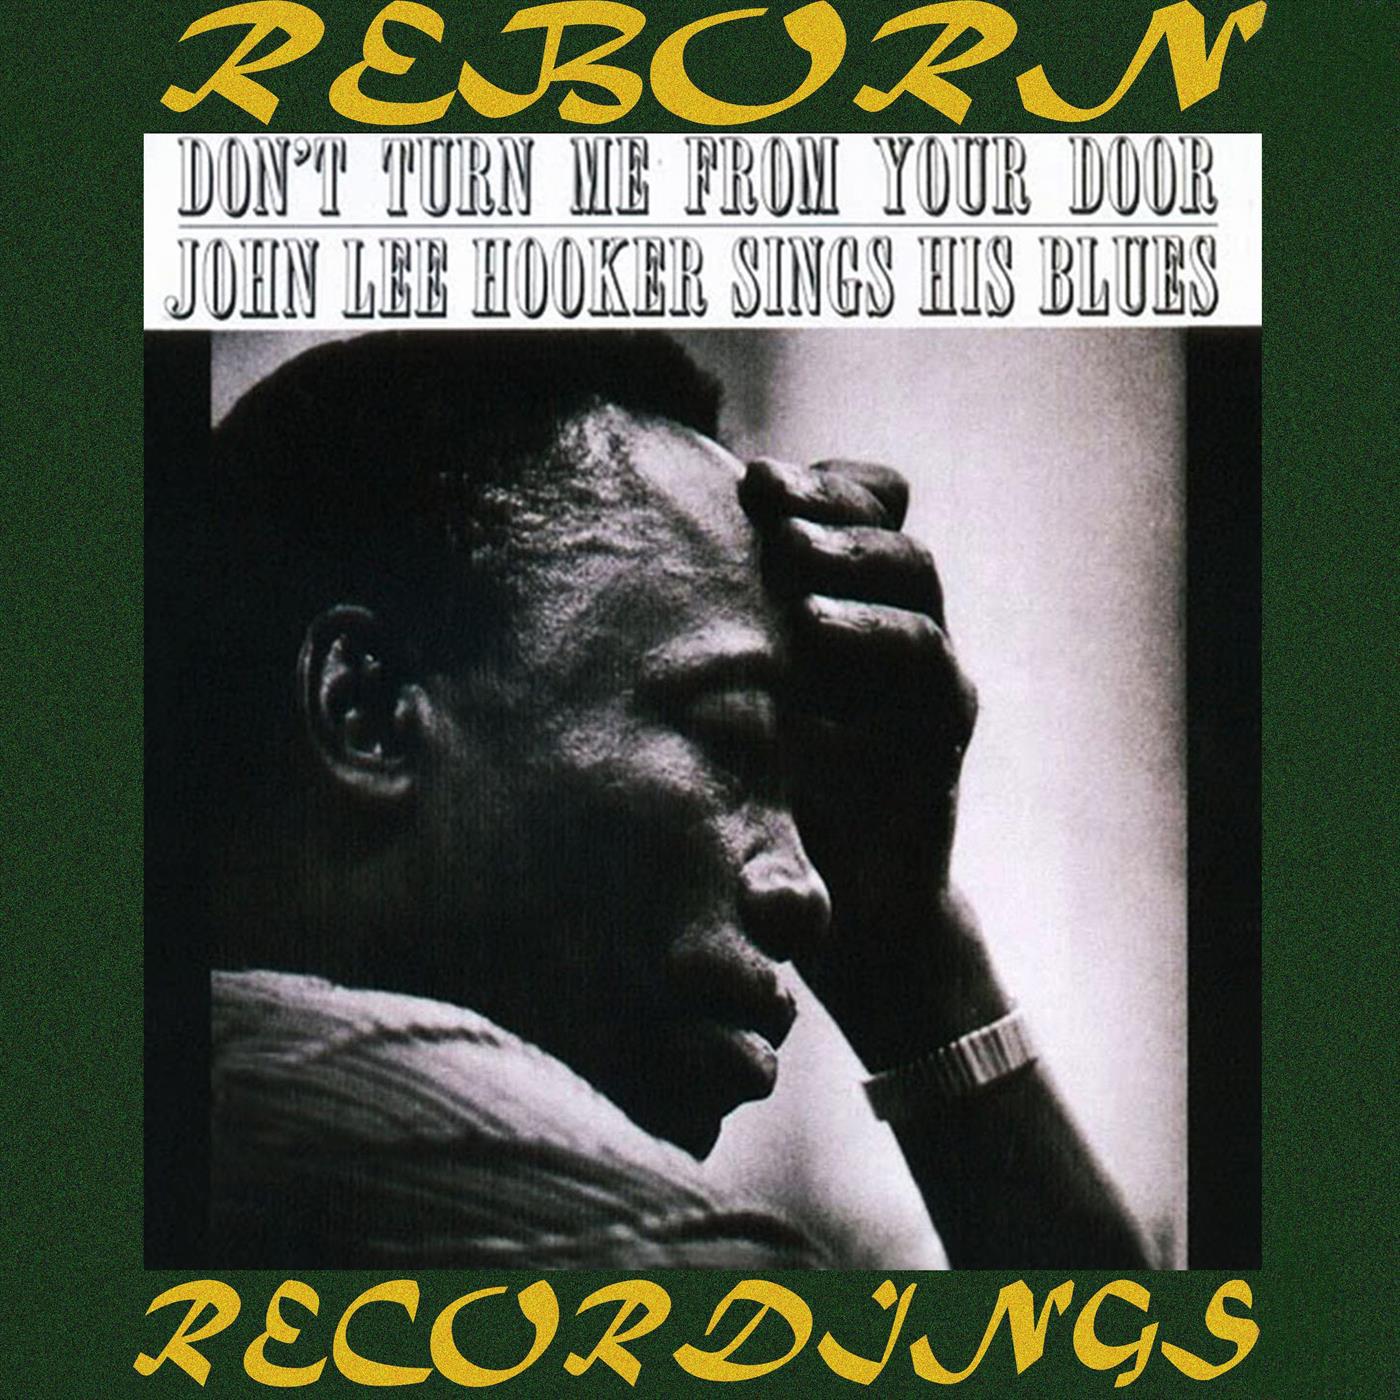 Don't Turn Me from Your Door John Lee Hooker Sings His Blues (HD Remastered)